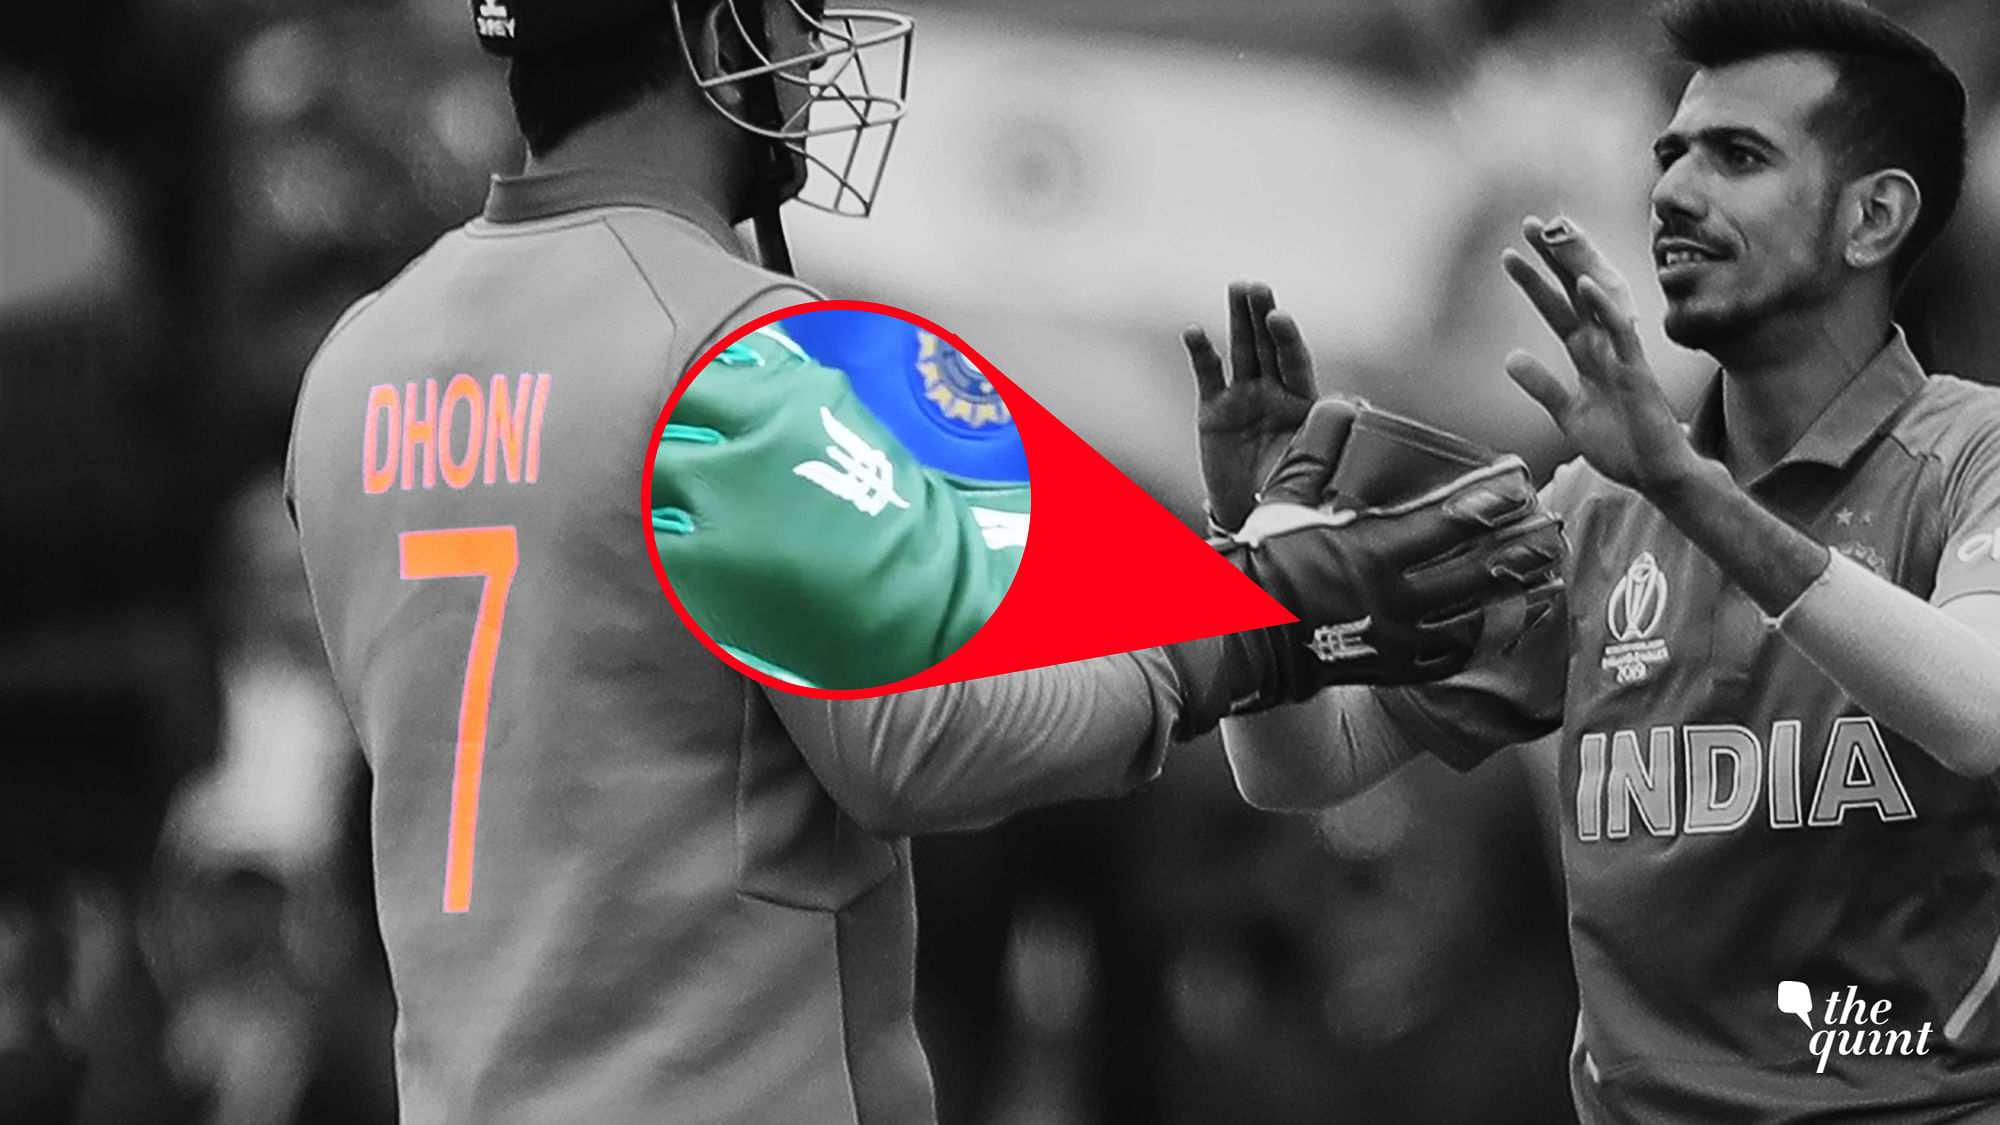 Committee of Administrators (CoA) chief Vinod Rai has said the logo on MS Dhoni’s glove is not a military symbol.